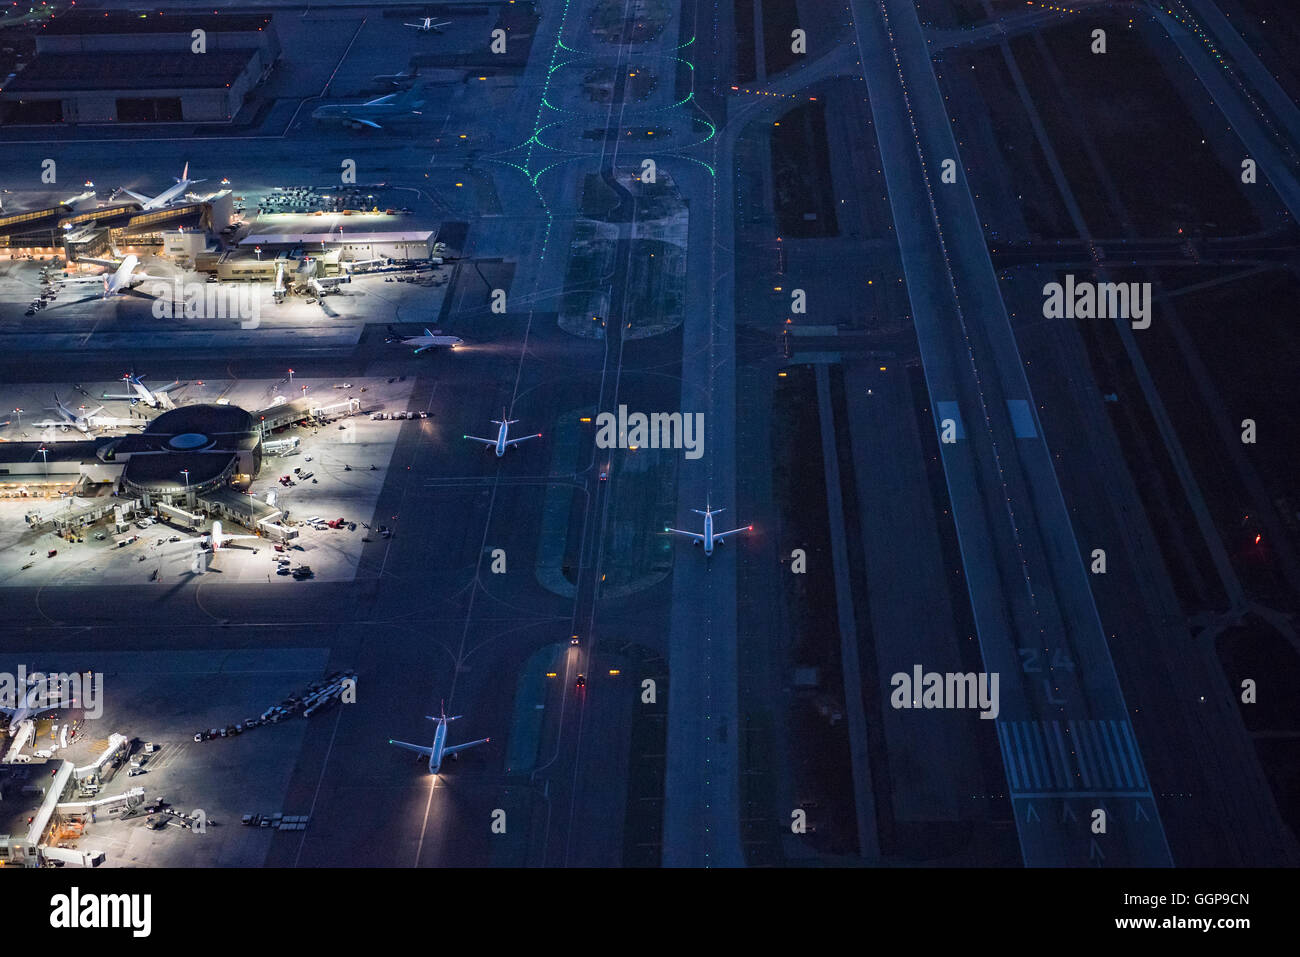 Aerial view of airplanes taxing on airport runway Stock Photo